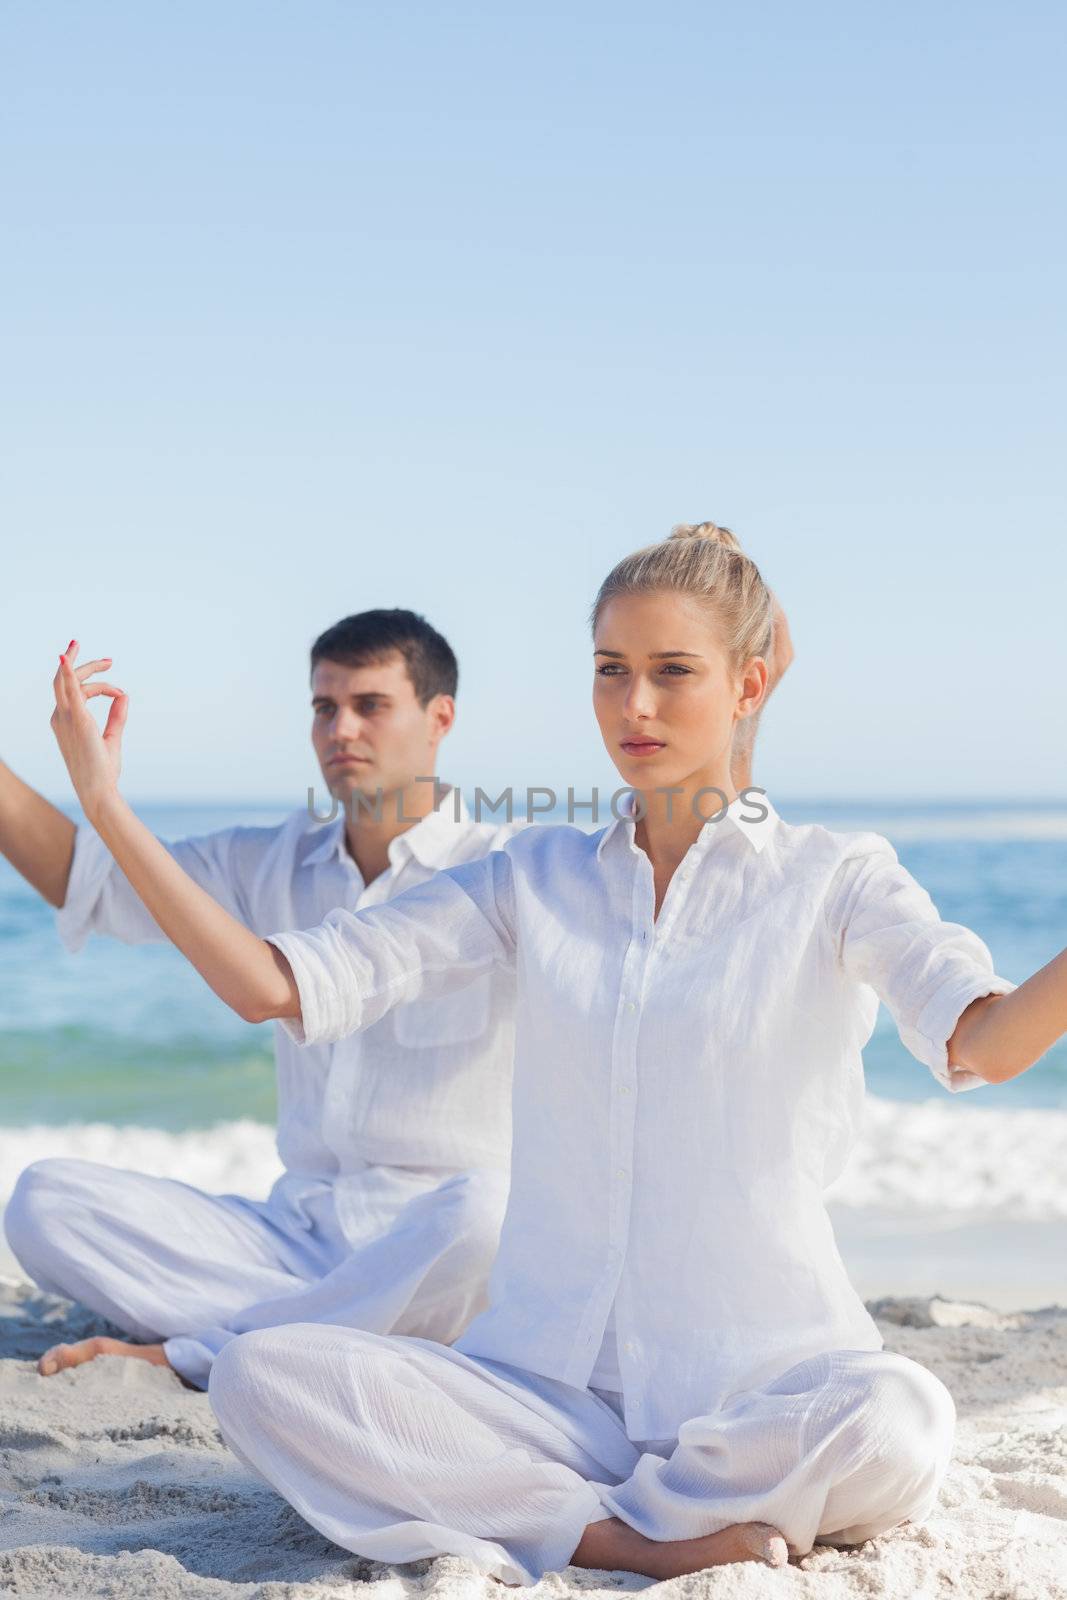 Attractive people doing yoga exercises at beach on a sunny day